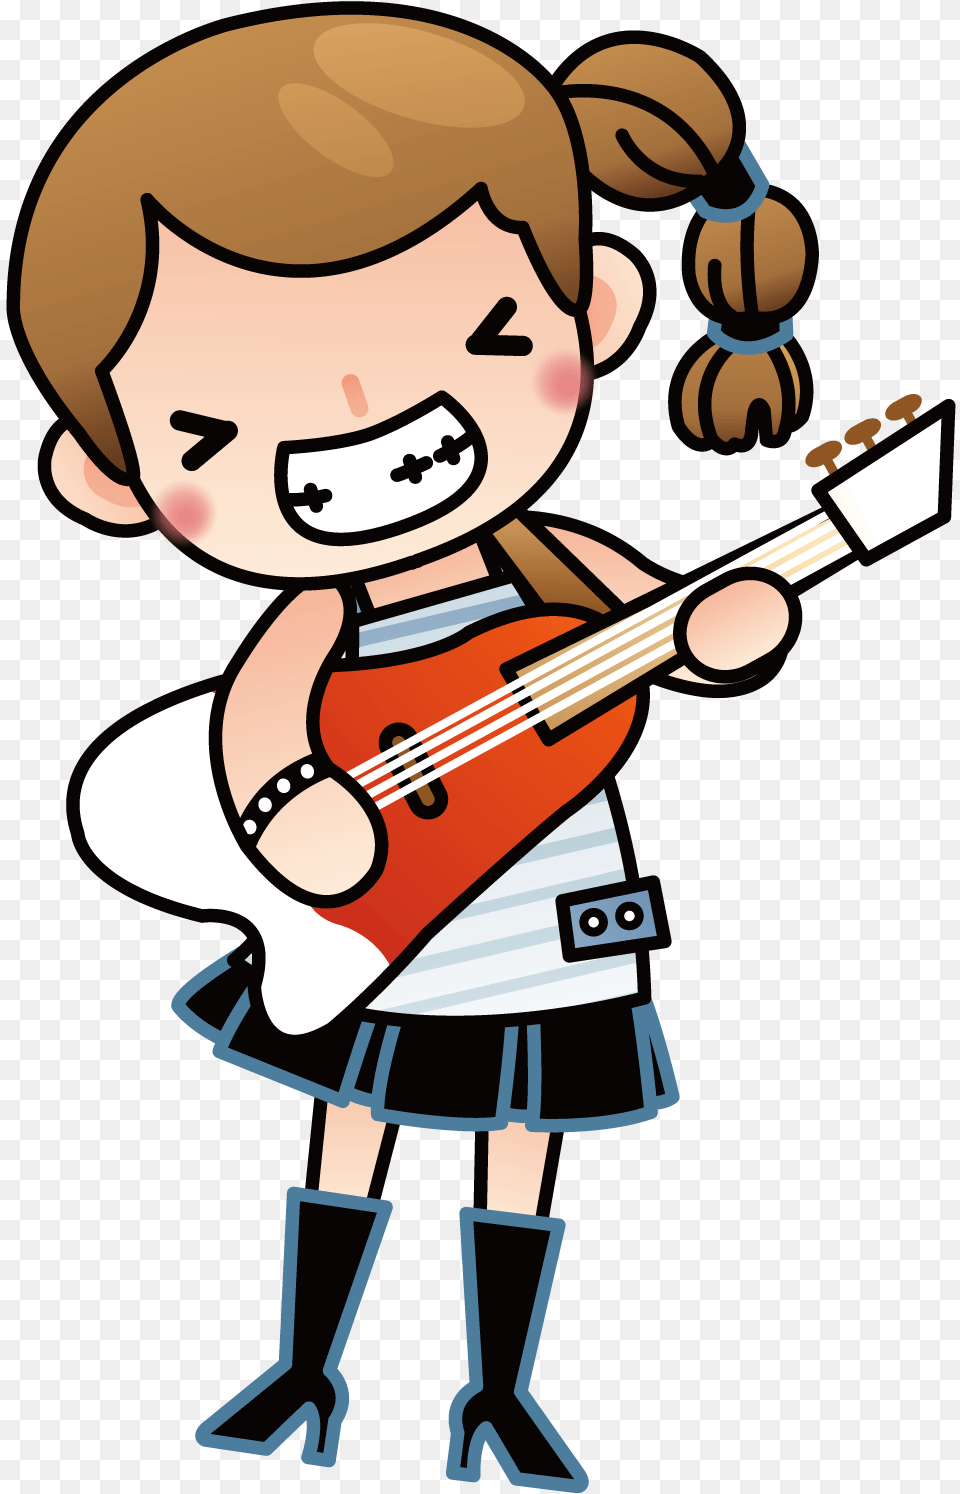 Music Concert Cartoon Illustration Concert Music Illustrations, Baby, Person, Musical Instrument, Violin Png